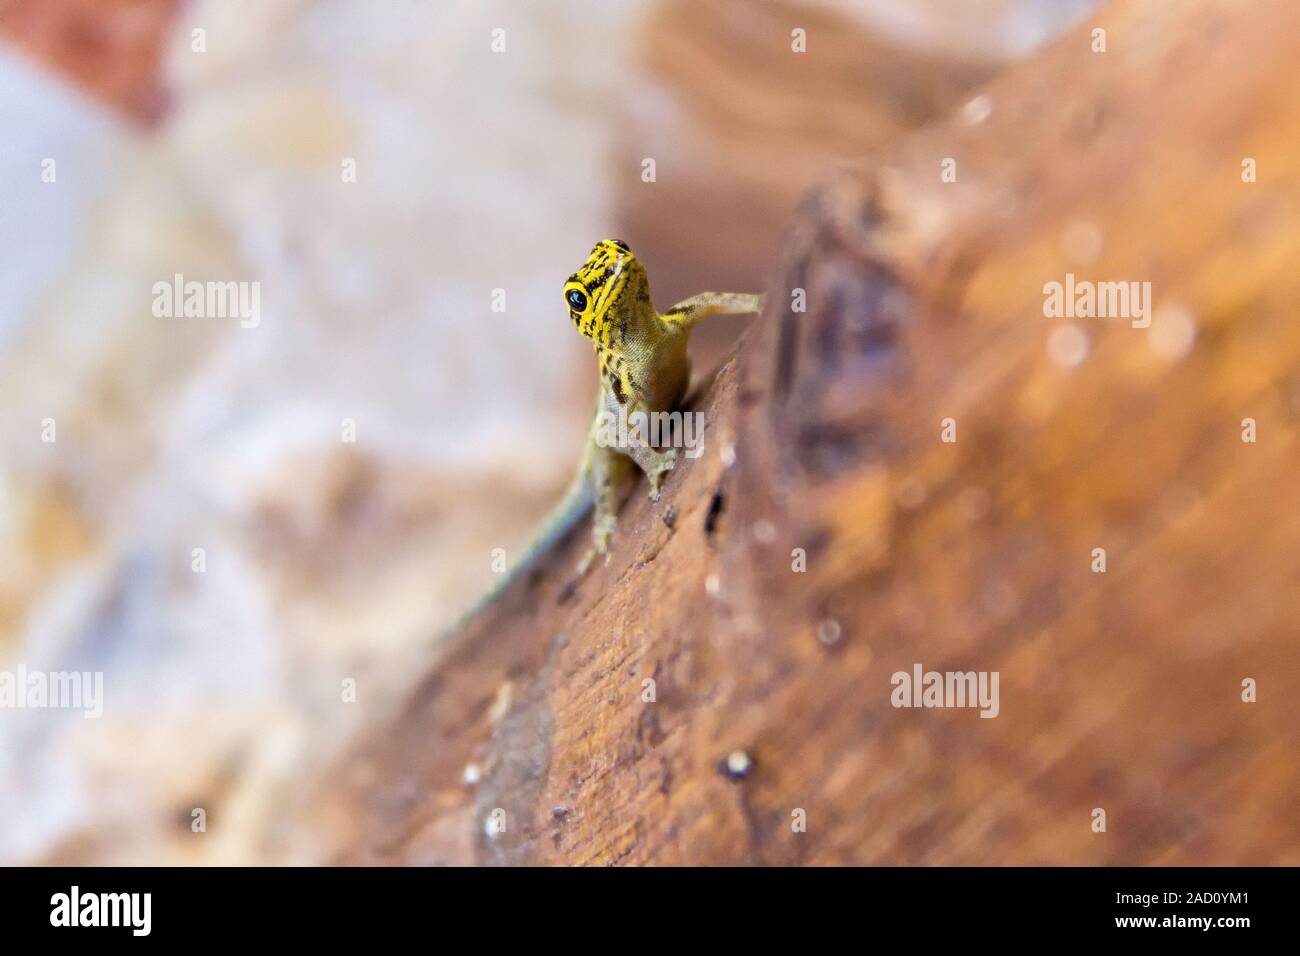 Close up of a Gecko with yellow head (Lygodactylus picturatus) on a wooden pole, Zanzibar Stock Photo